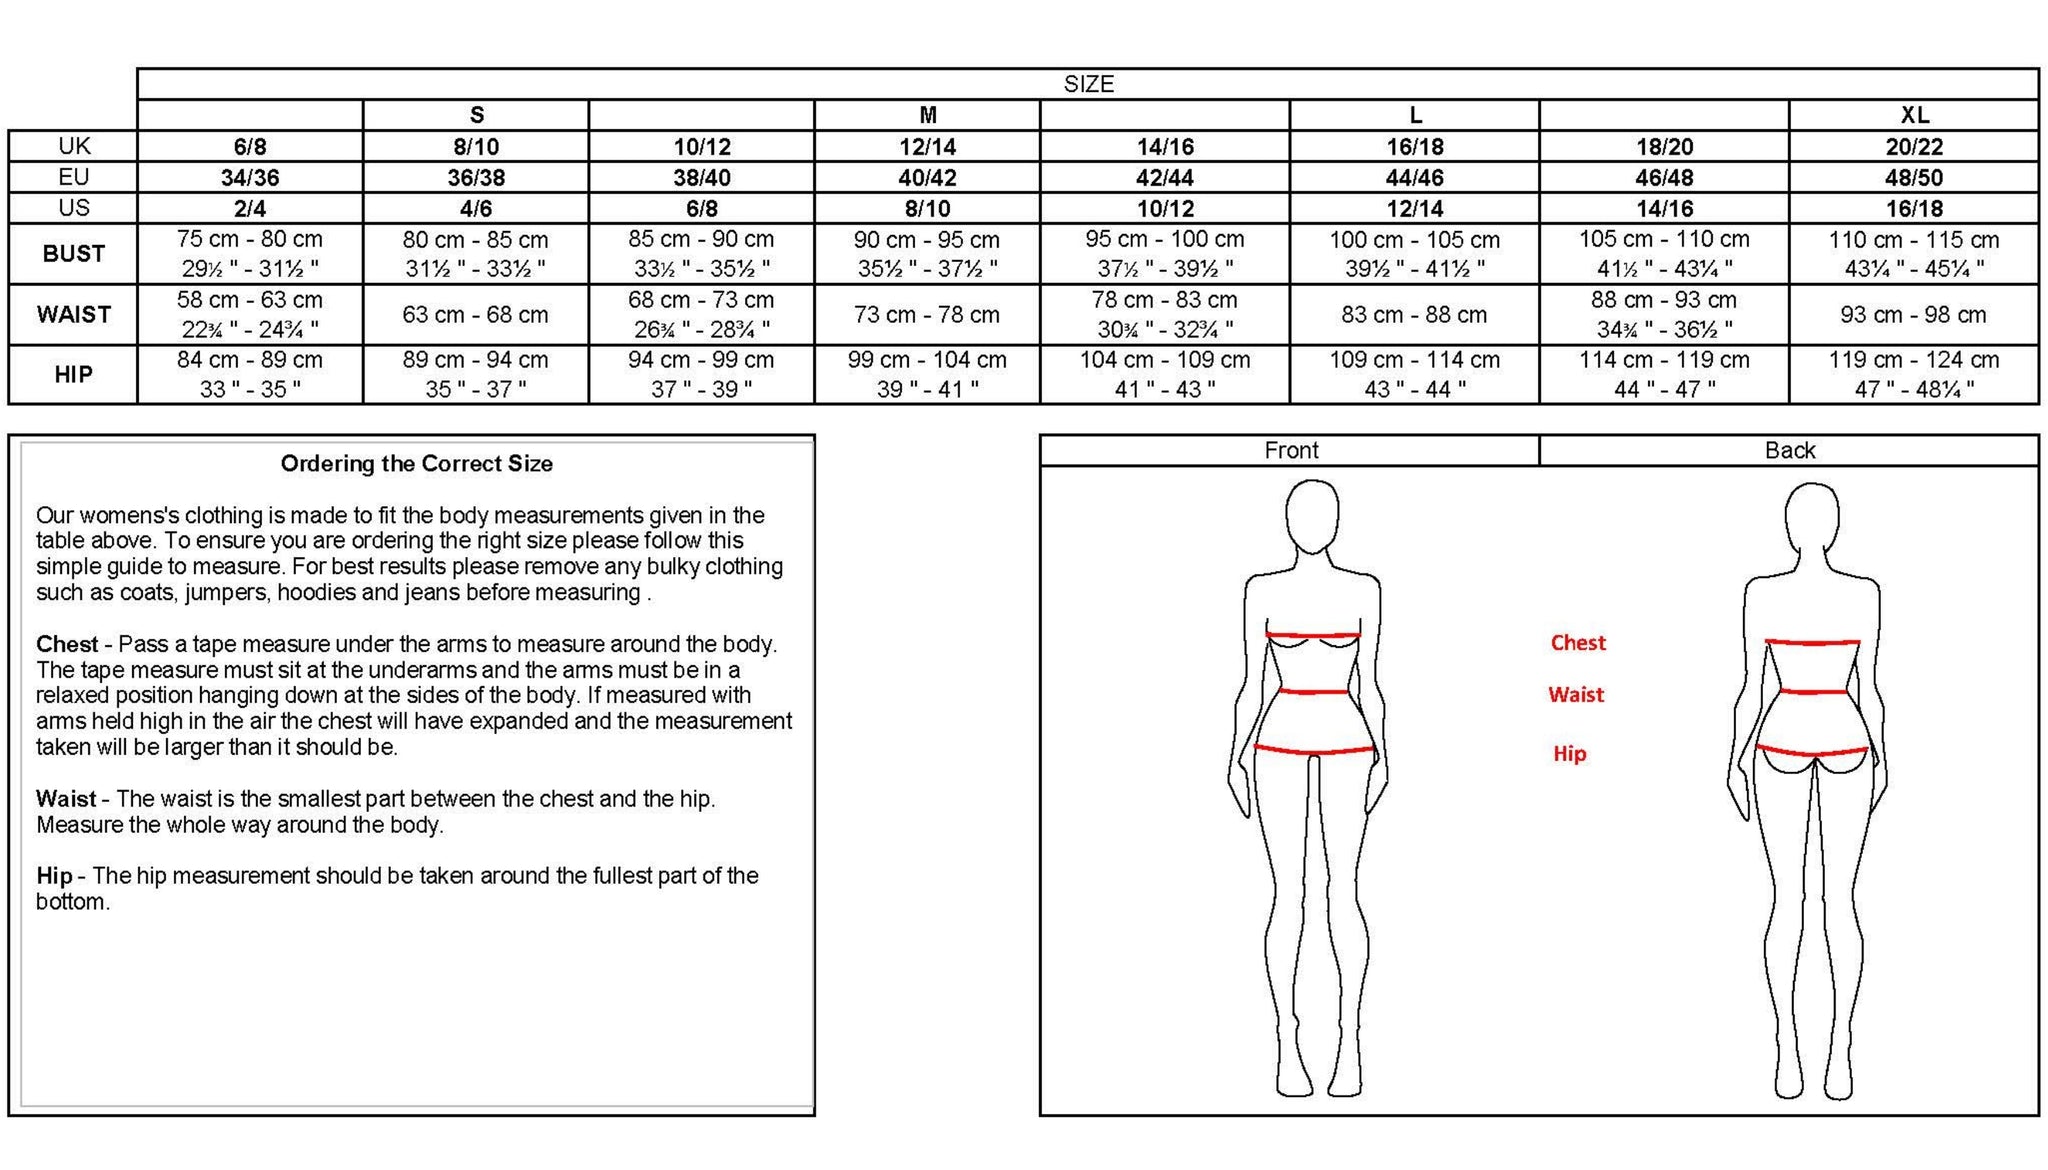 Onesie Size Guides | Sizing Guide for Onesies